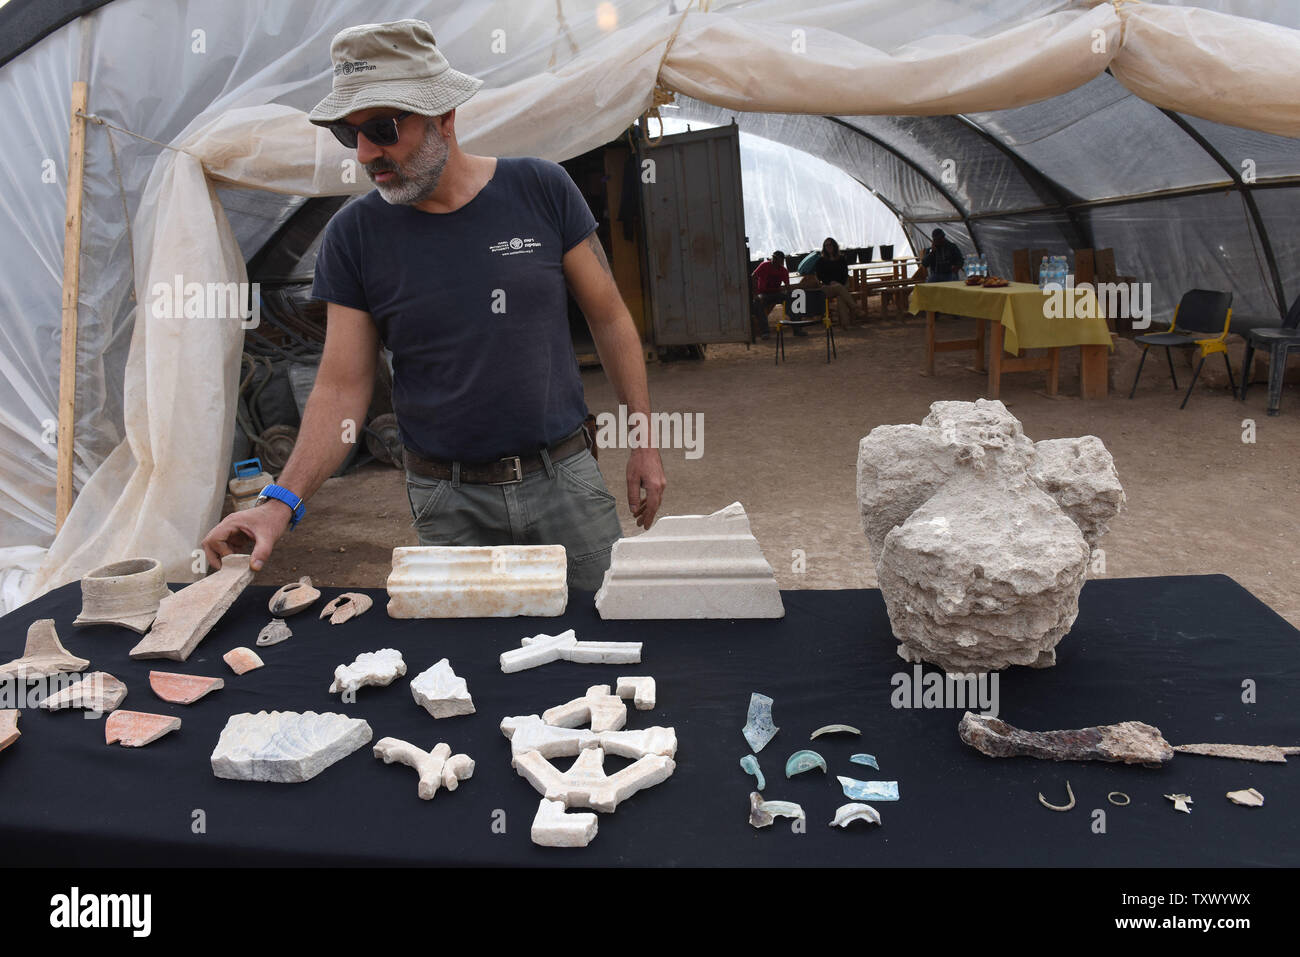 Naftali Aizik, an archeologist with the Israel Antiquities Authority, looks at artifacts discovered in an 1,5000 year old Byzantine Period monastery and church uncovered during large scale excavations in Beit Shemesh, Israel, December 20, 2017. The Byzantine structure was discovered during excavations prior to the expansion of Ramat Beit Shemesh for housing. The marble base is engraved with a Maltese cross. Artifacts were found and a number of architectural elements including a marble pillar base decorated with crosses and marble window screens. The artifacts found may indicate that the site w Stock Photo